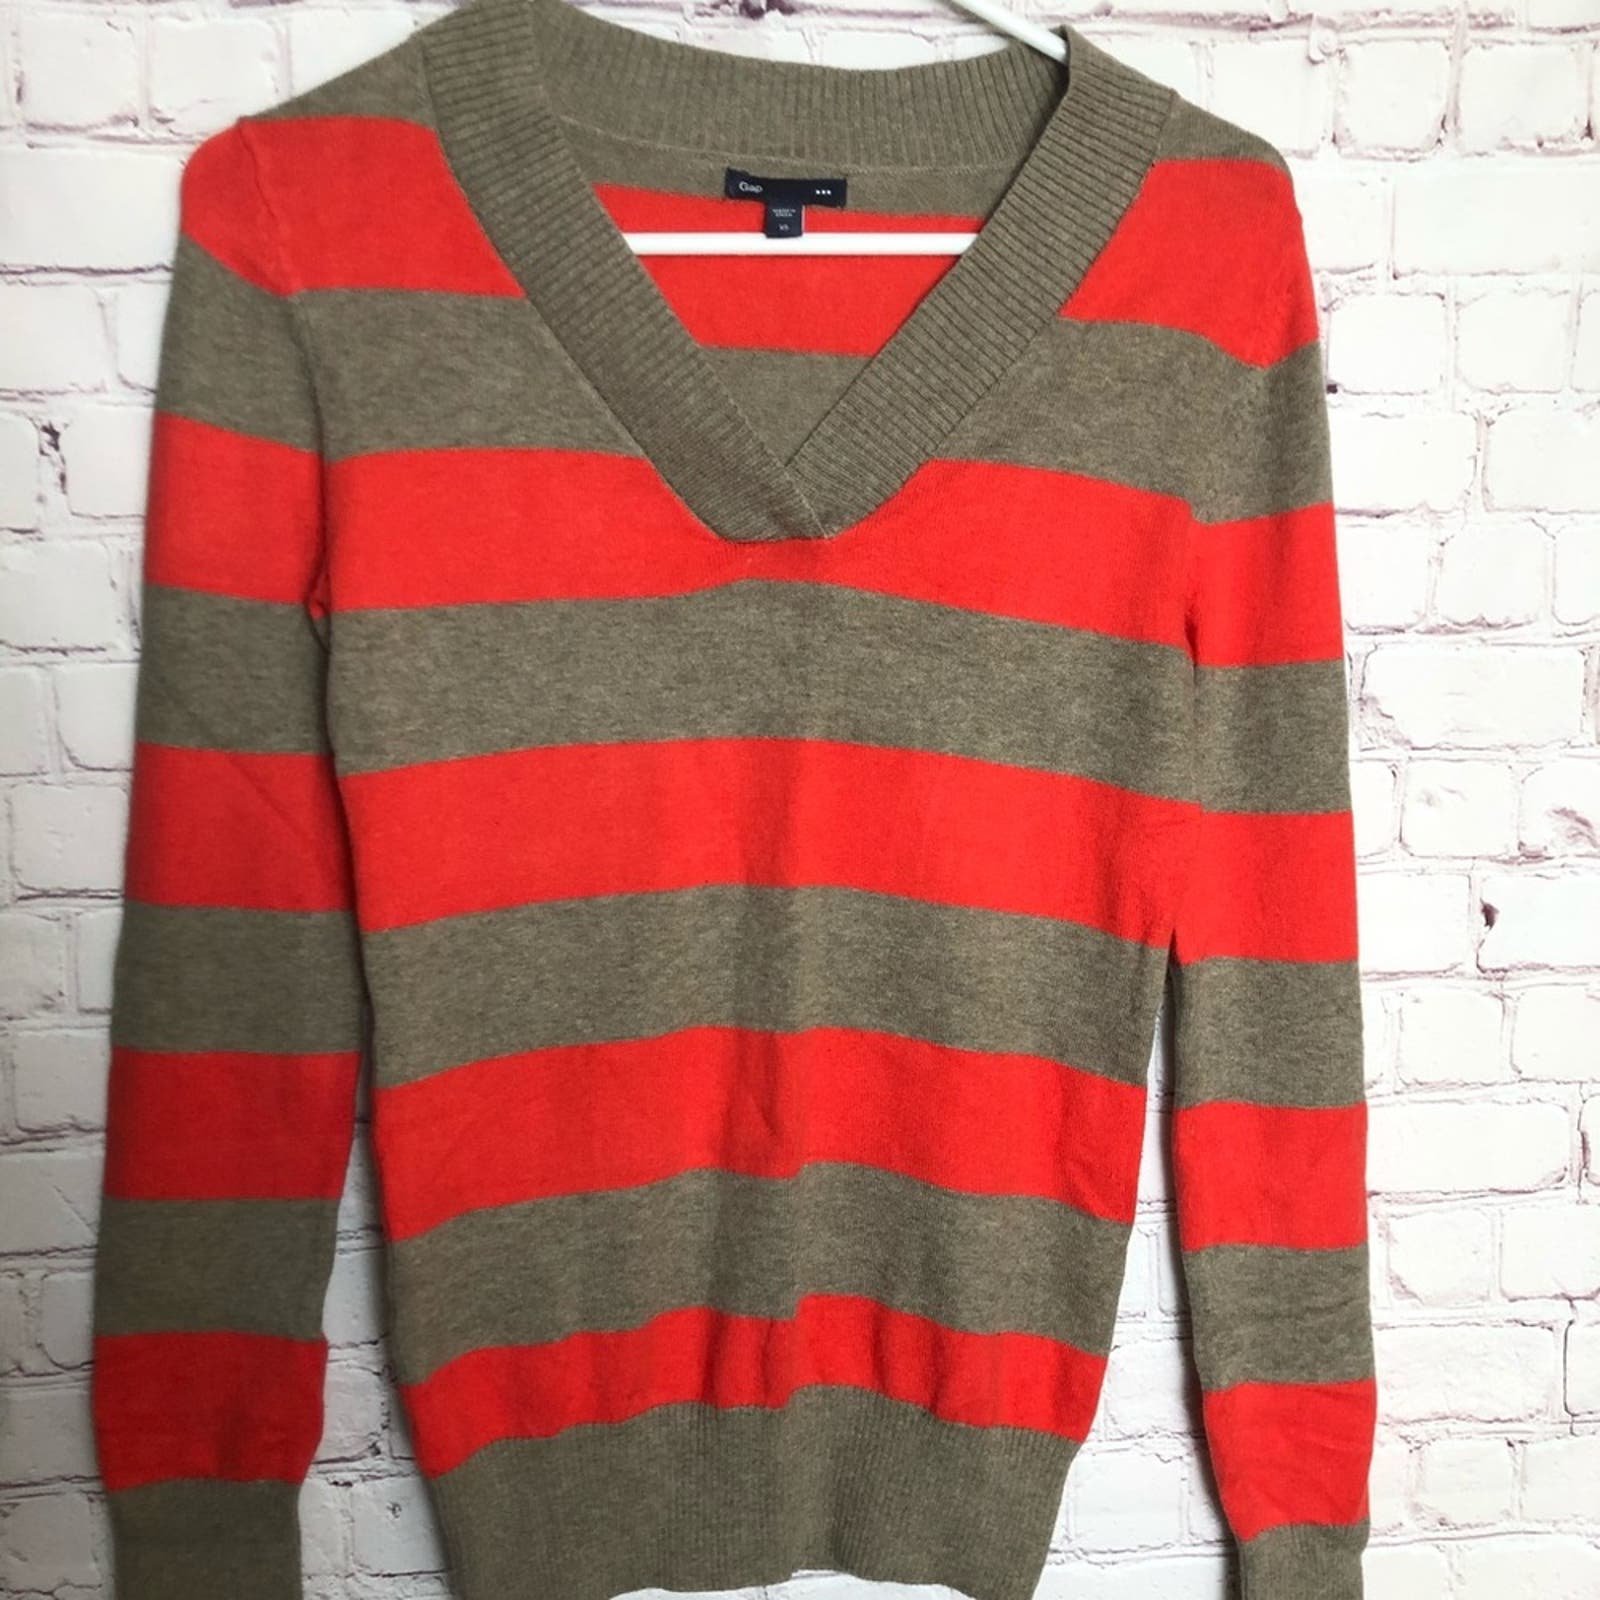 Authentic Gap Women’sLong Sleeve Striped V Front Sweater Sz XS pp92YyrV7 Cheap